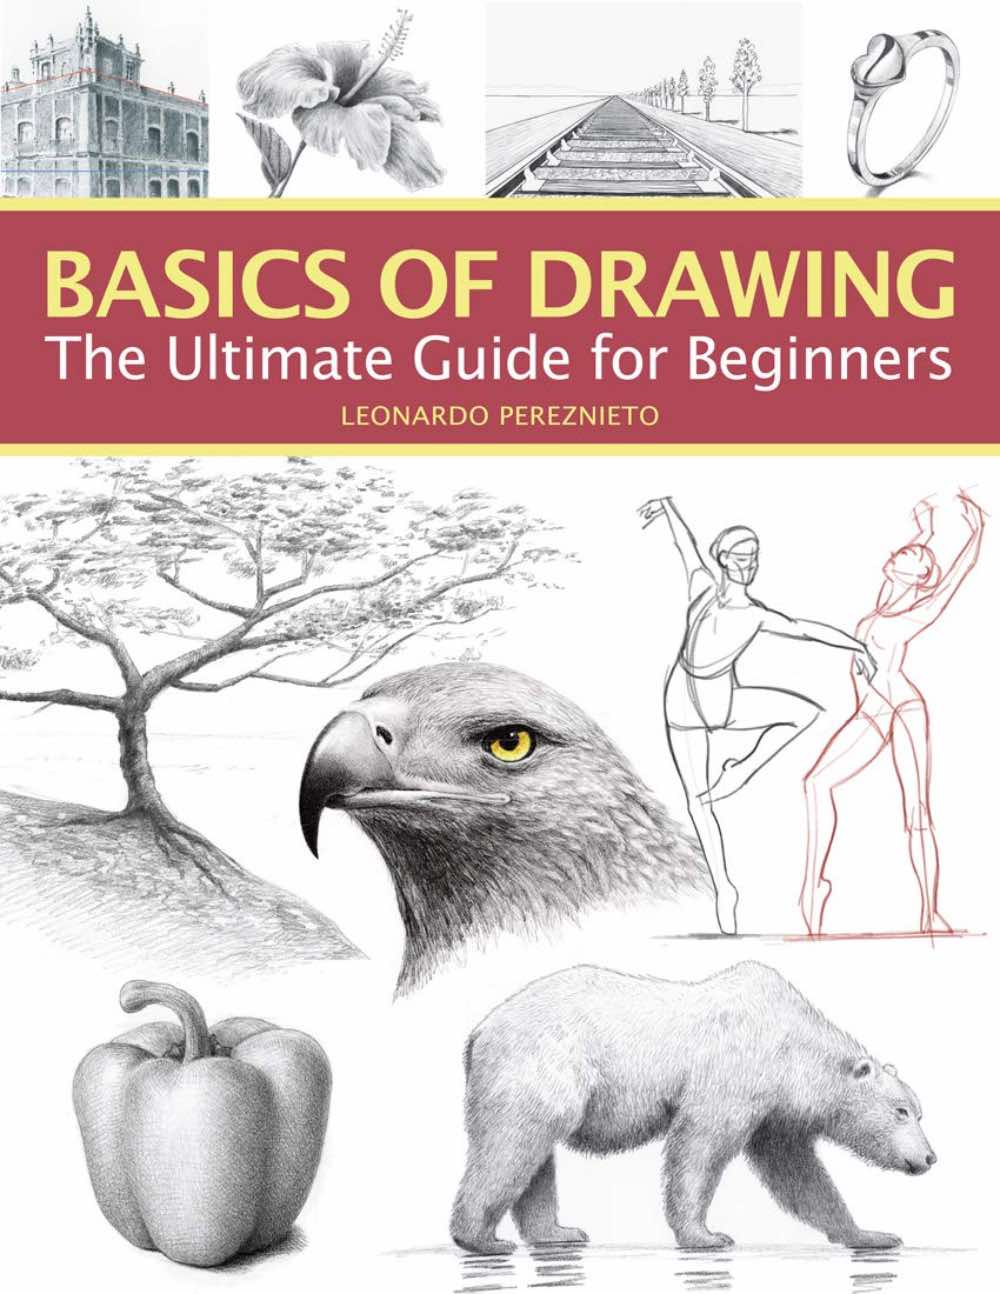 Basics of Drawing: The Ultimate Guide for Beginners